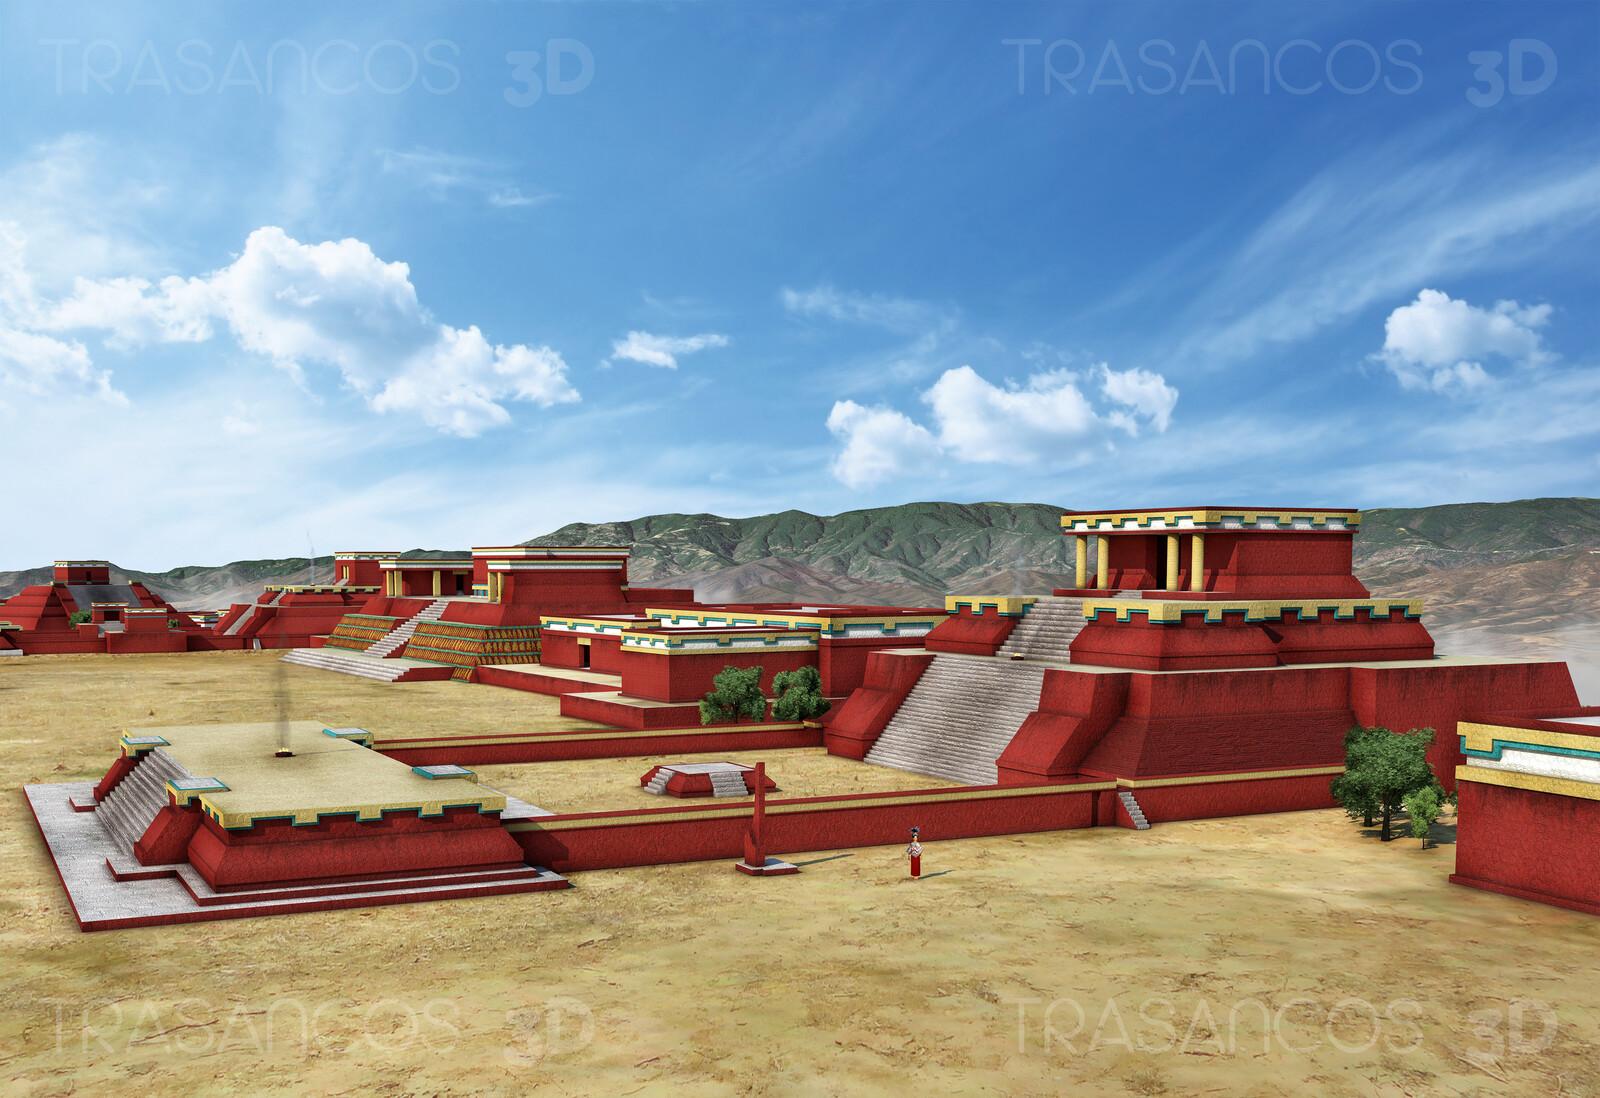 View of the Sistem IV of buildings in the city of Monte Albán.
Modeled in collaboration with:
- Alejandro Soriano
- Carlos Paz